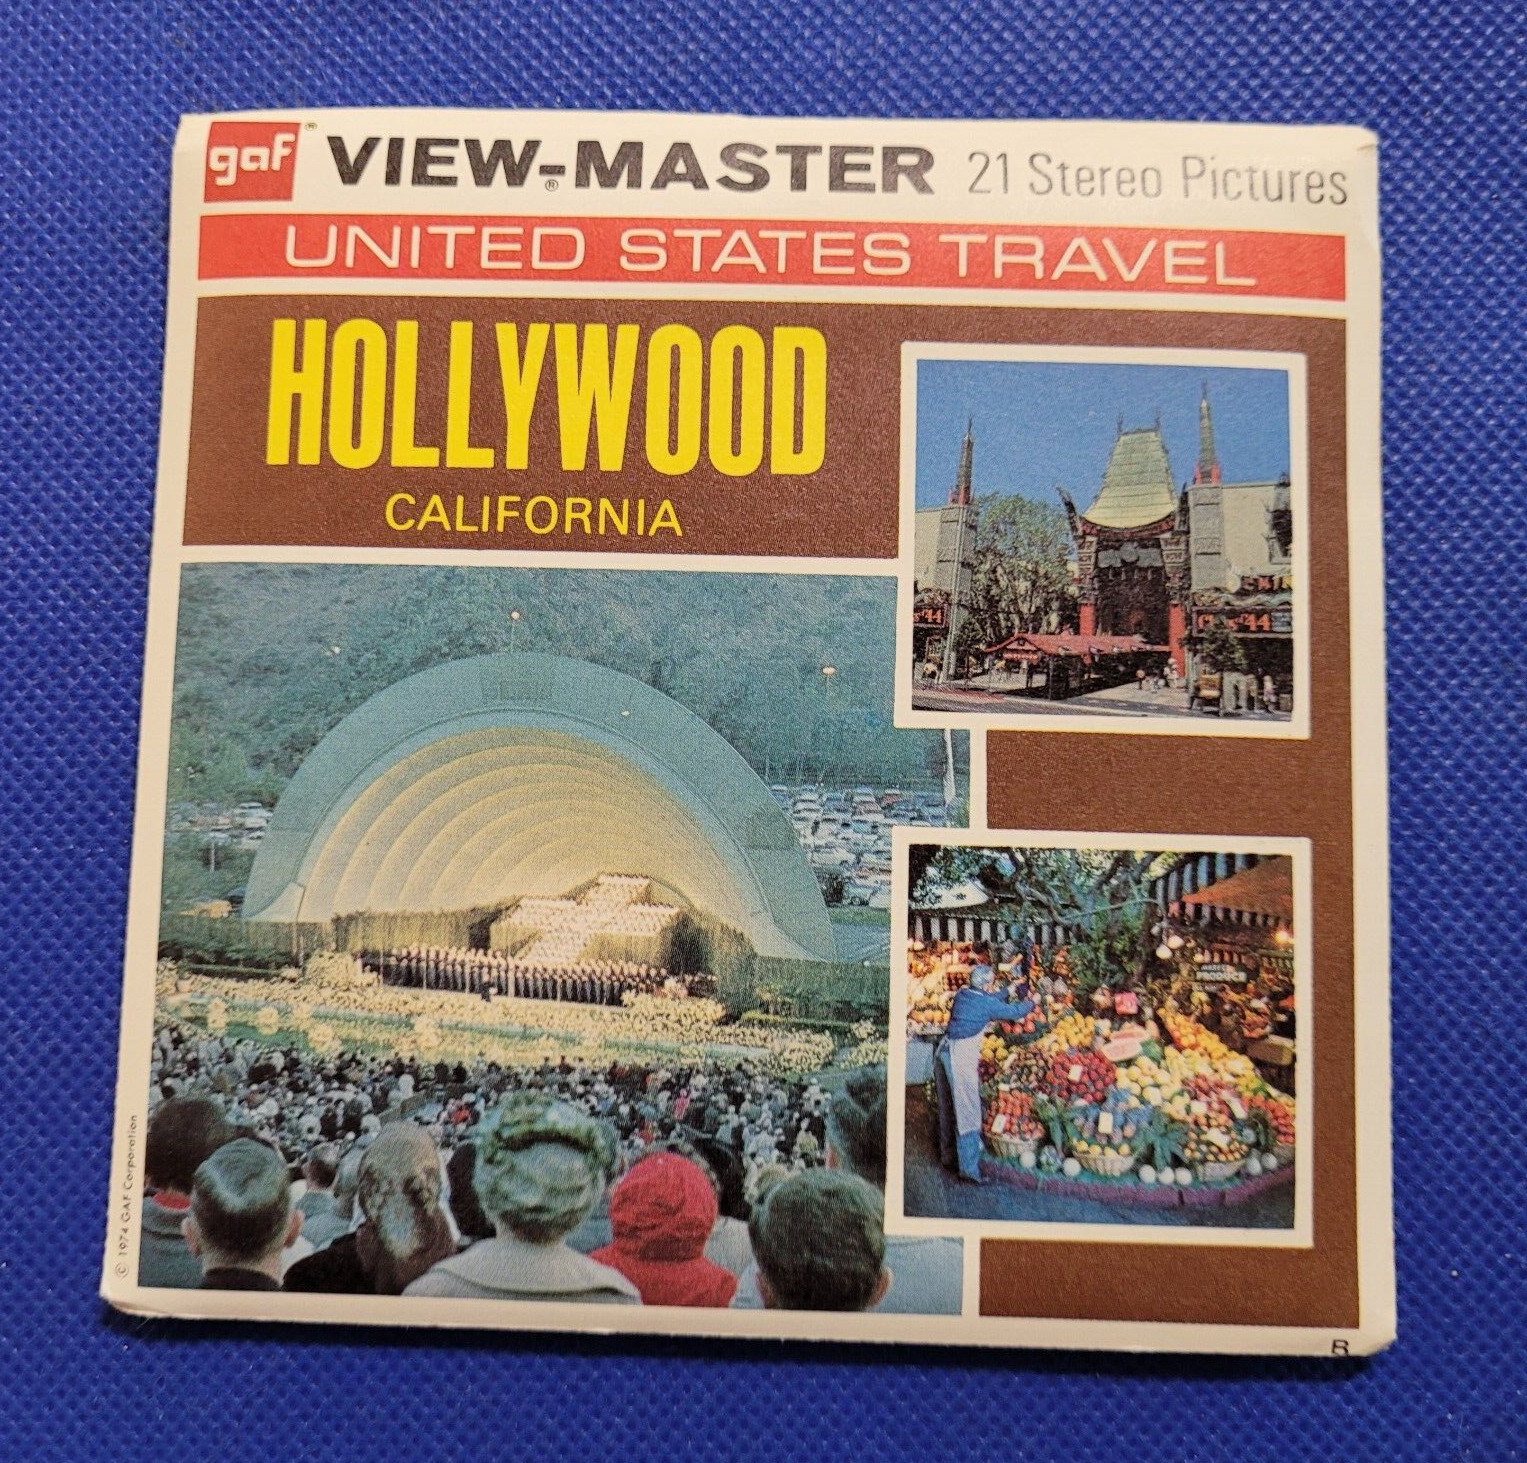 COLOR 1974 Gaf  A194 Hollywood California view-master 3 Reels Packet US Travel